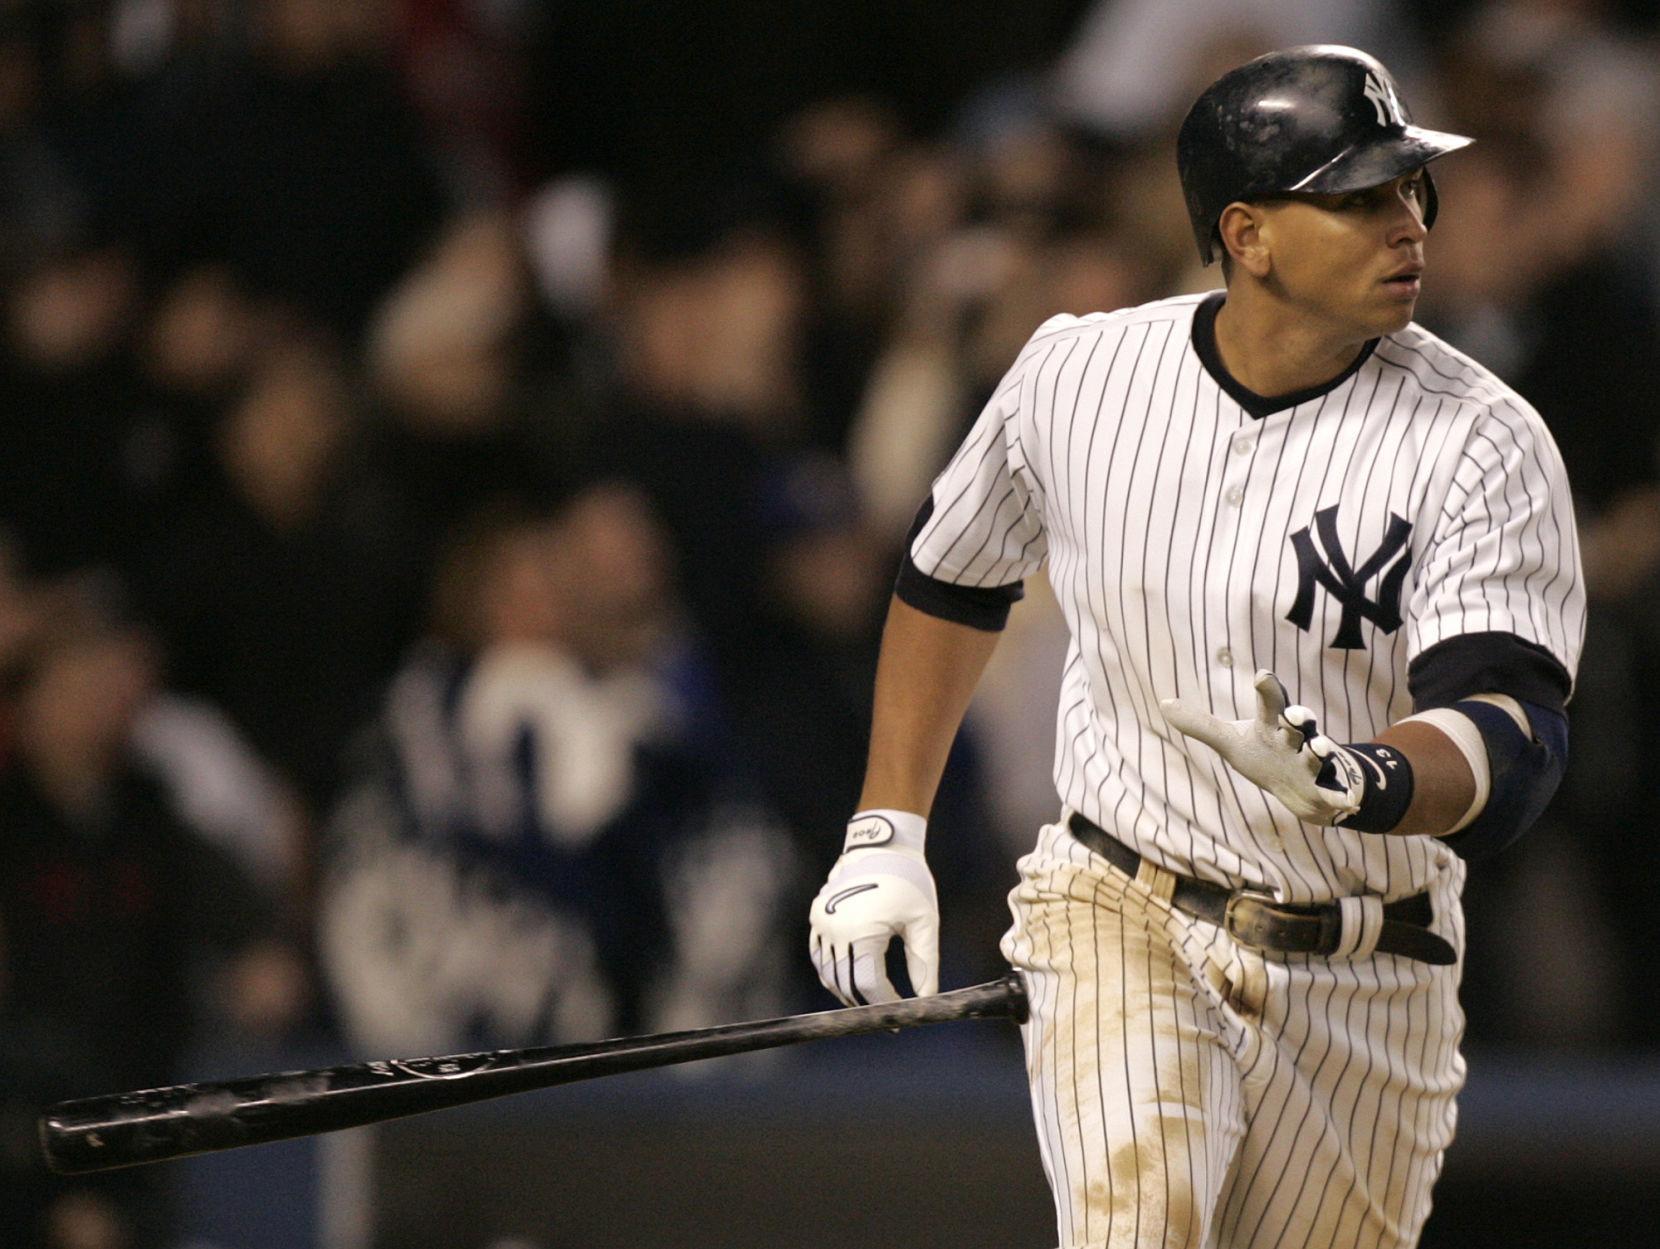 2005: A-Rod hits 3 homers, drives in 10 runs to lead Yankees